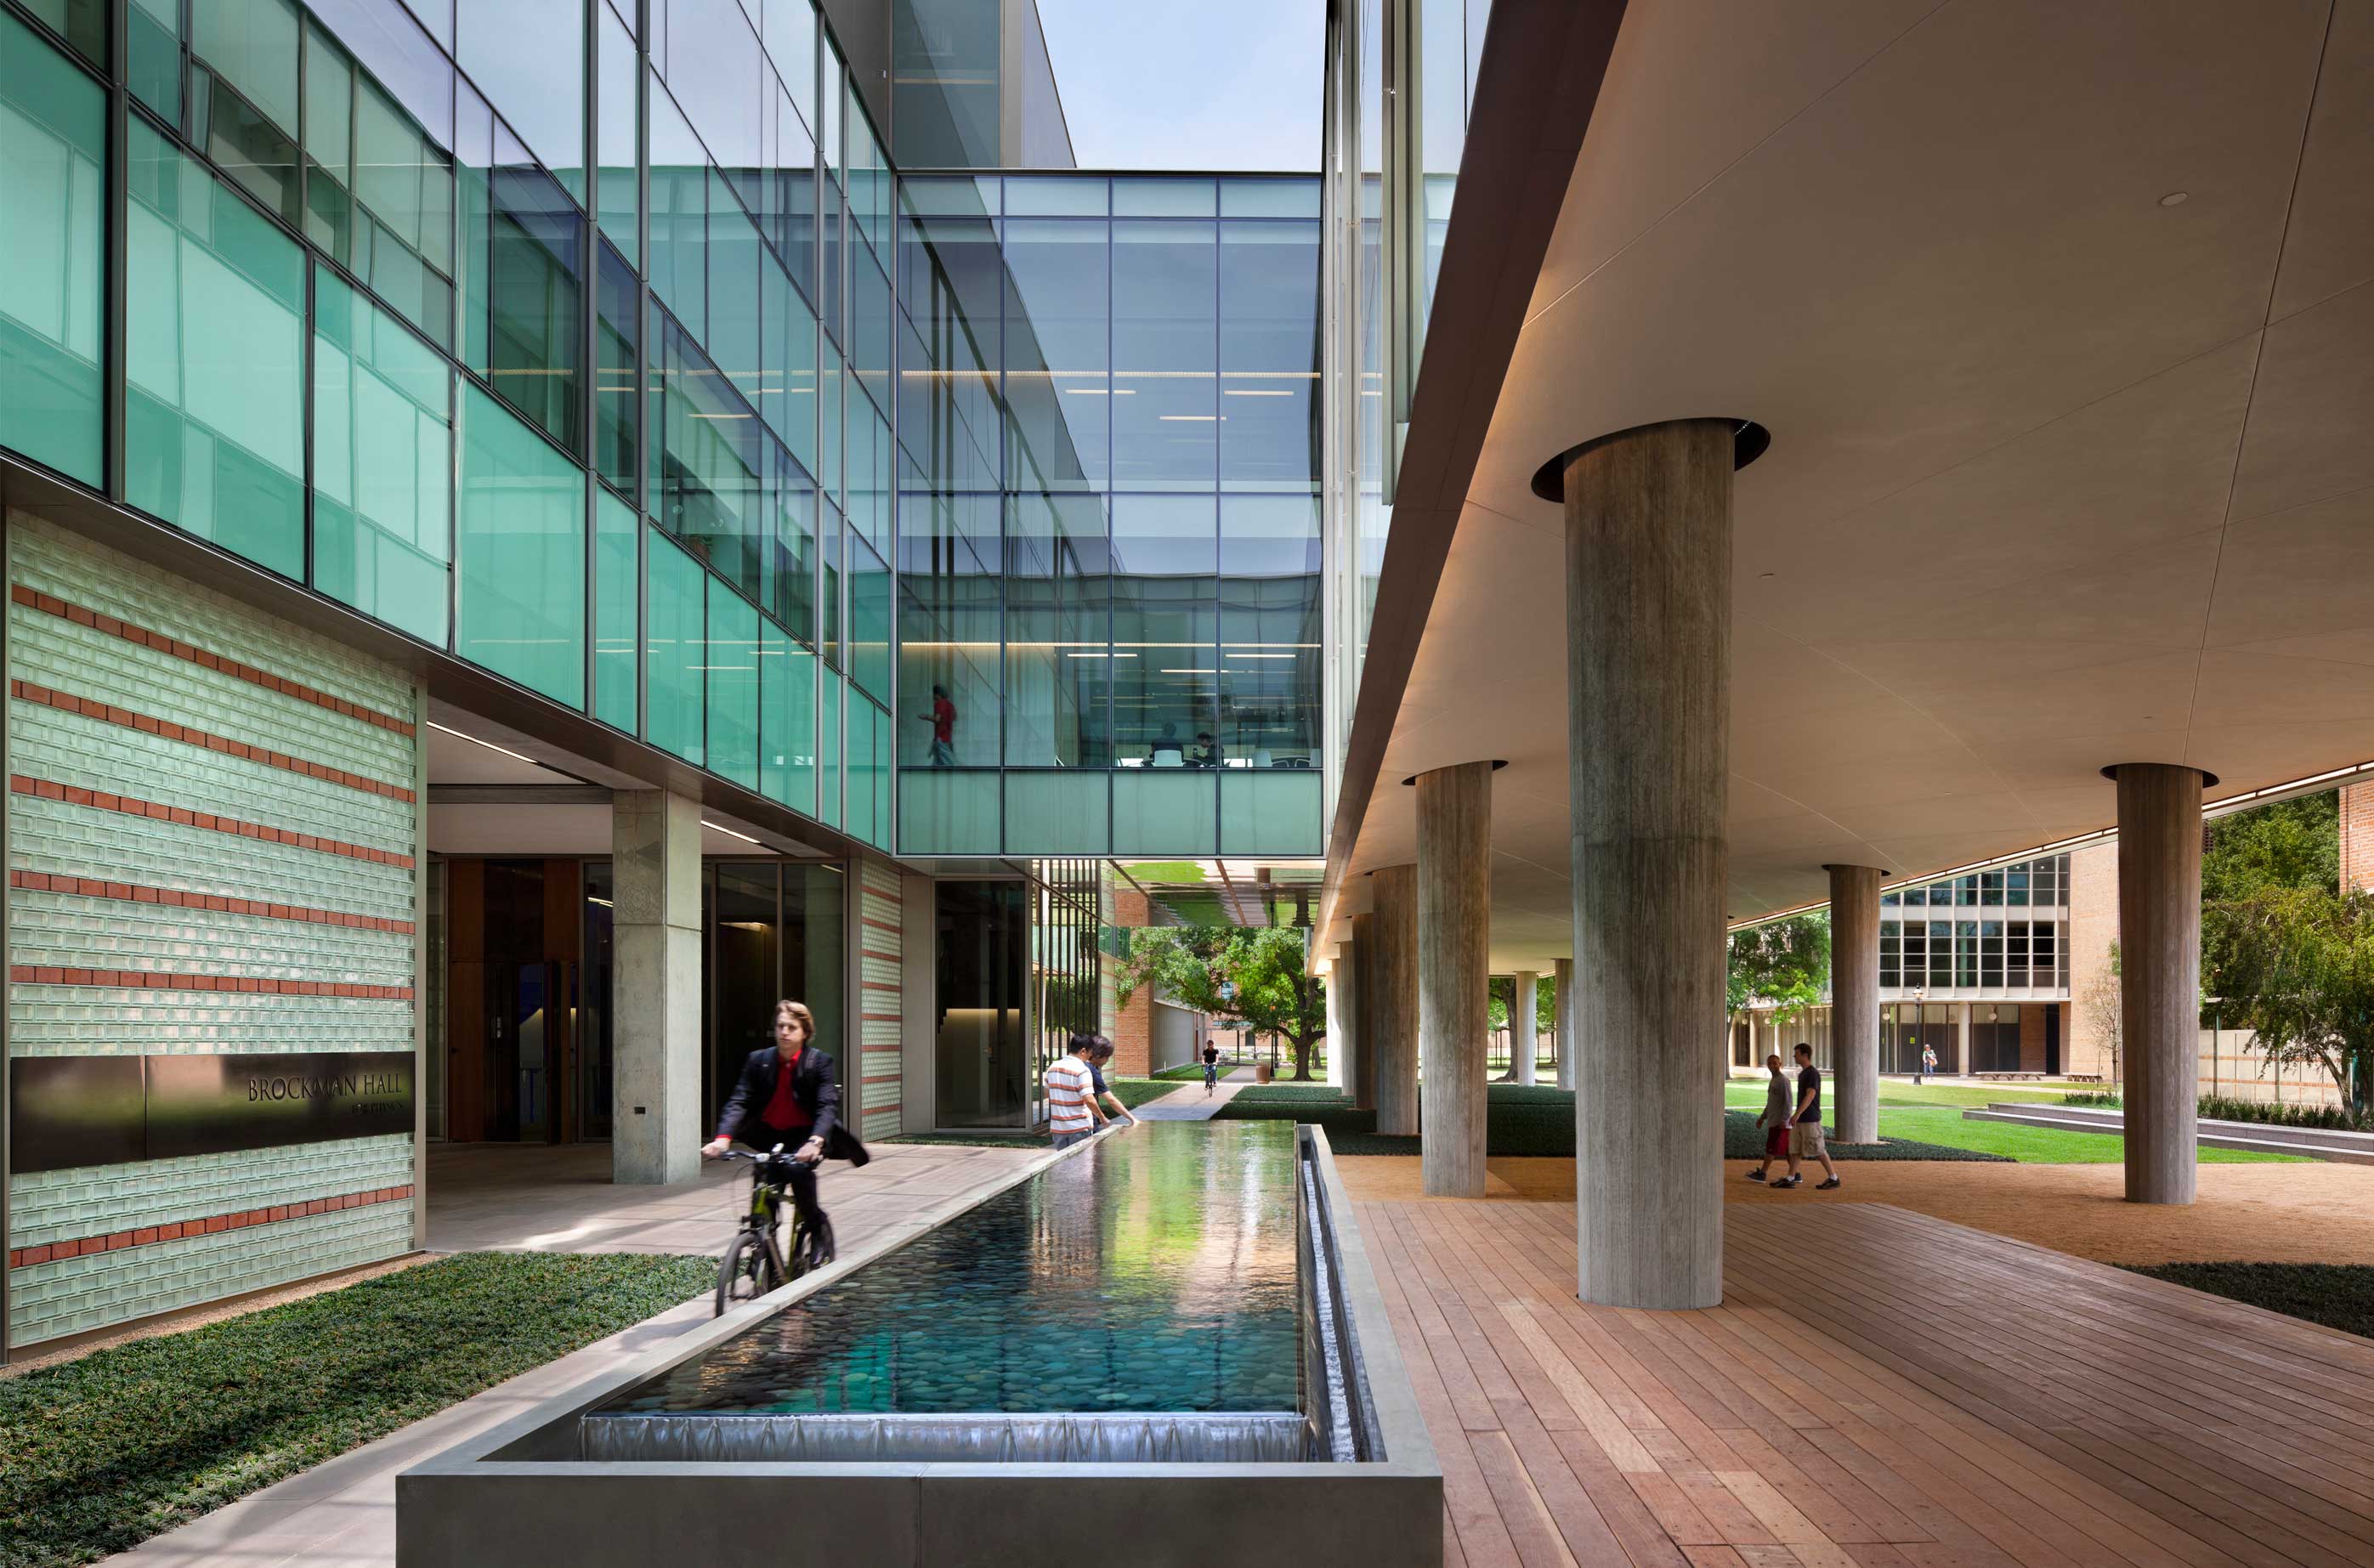 <p>Several outdoor seating areas and a water feature encourage students and faculty members to linger in the shade provided by the buildings. <br><small>&copy; Peter Aaron/OTTO</small></p>